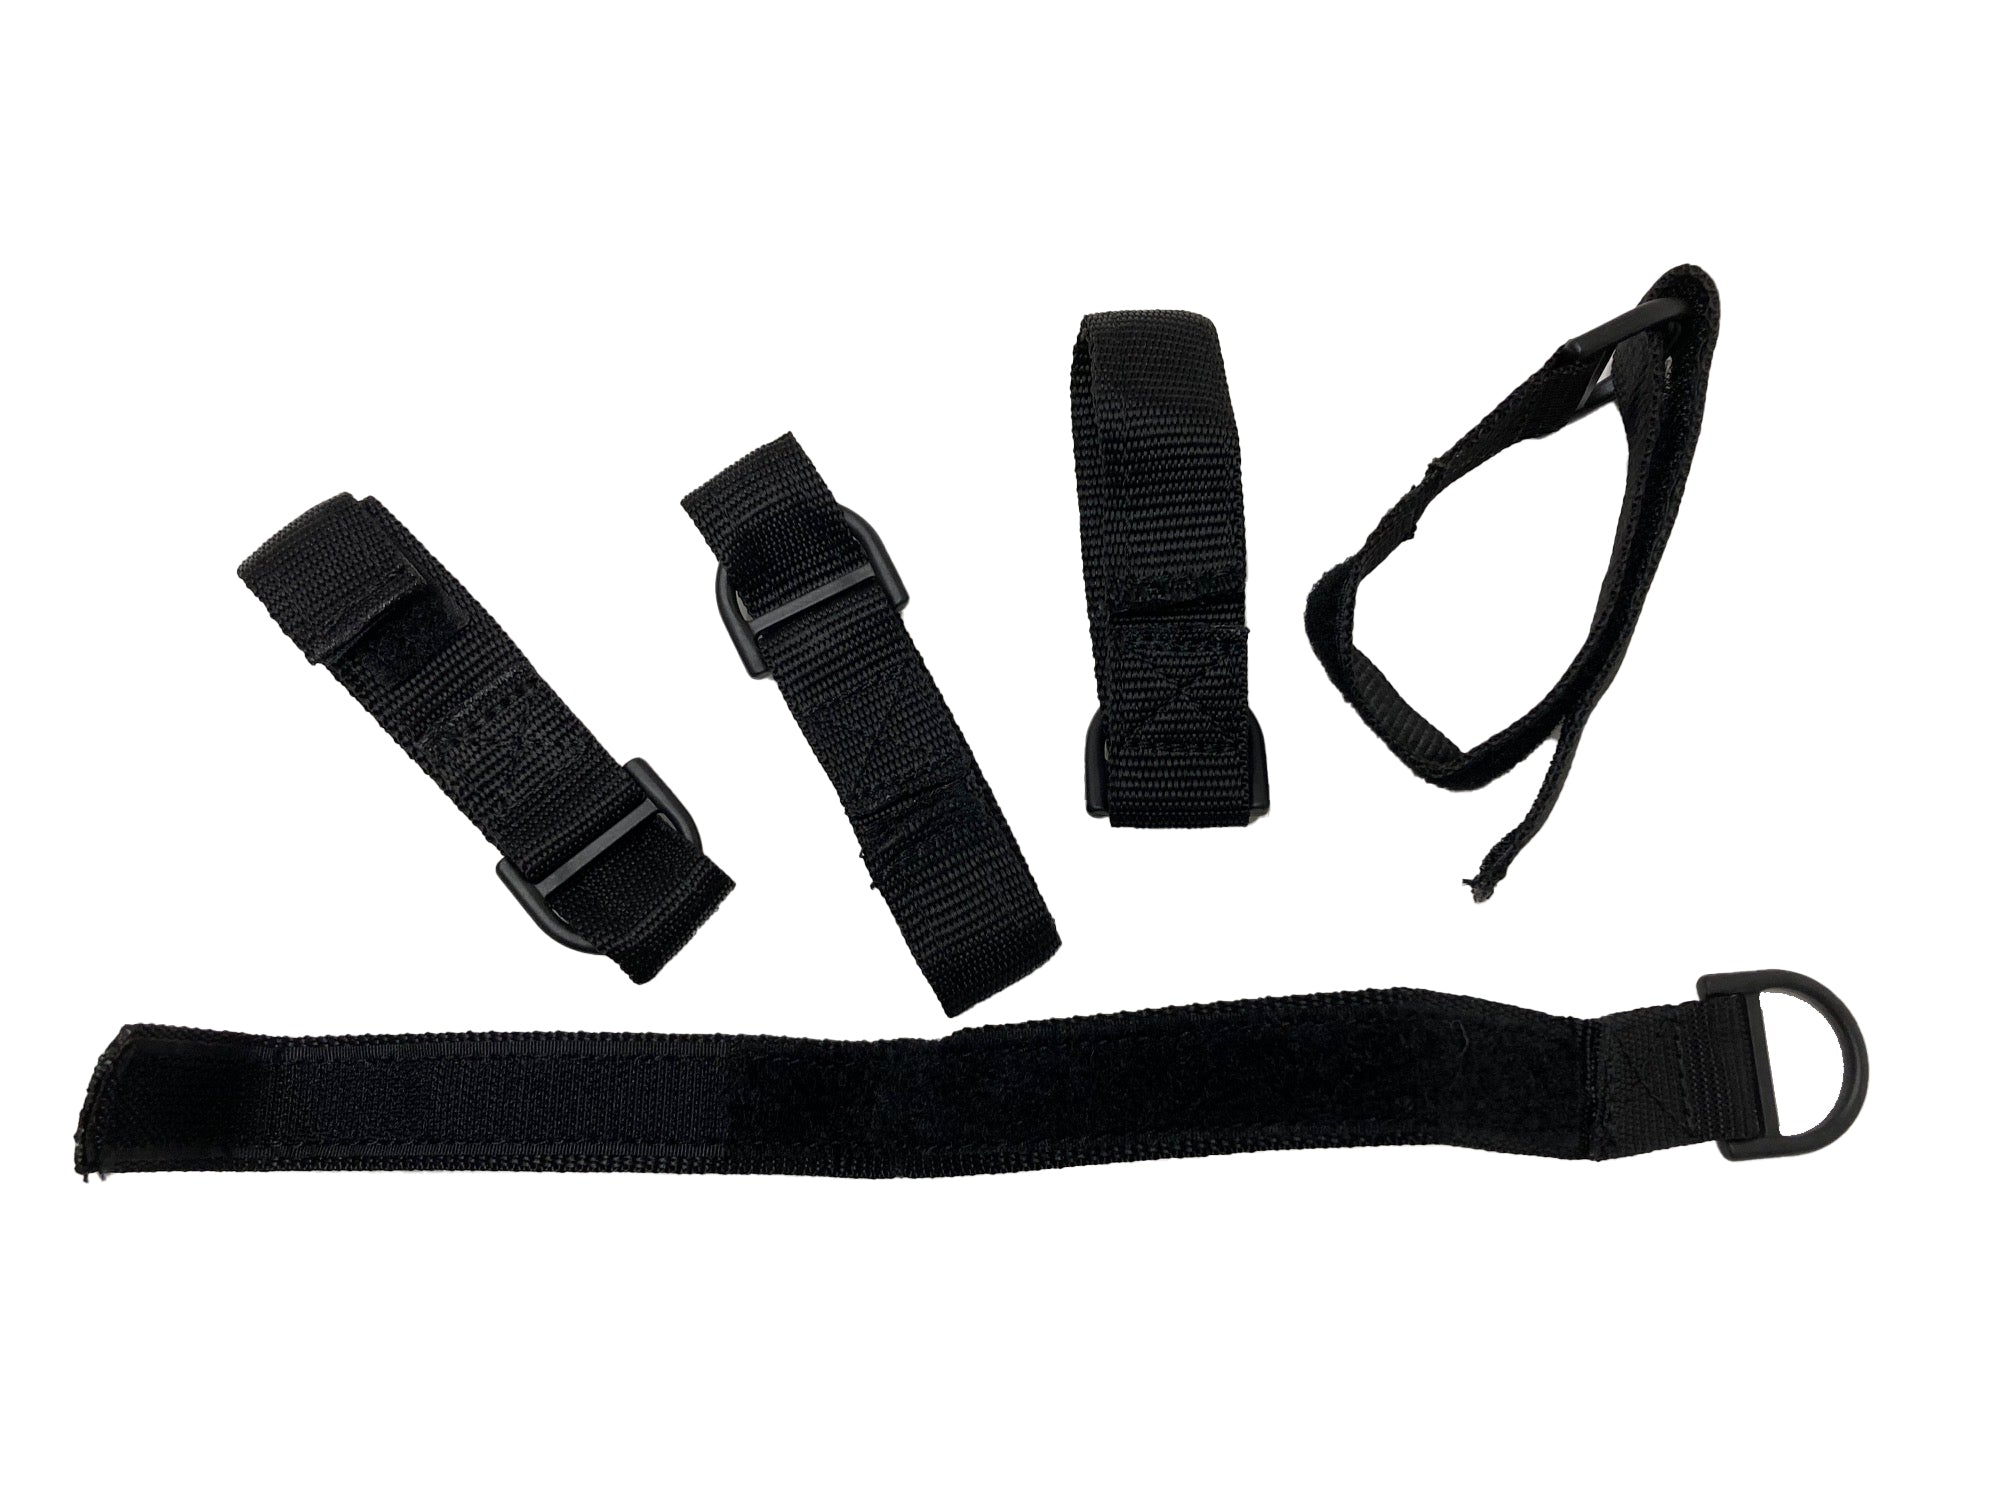 5 All Purpose Heavy-Duty Polyester Web Hook & Loop Cinch Straps 14"x1" Reusable